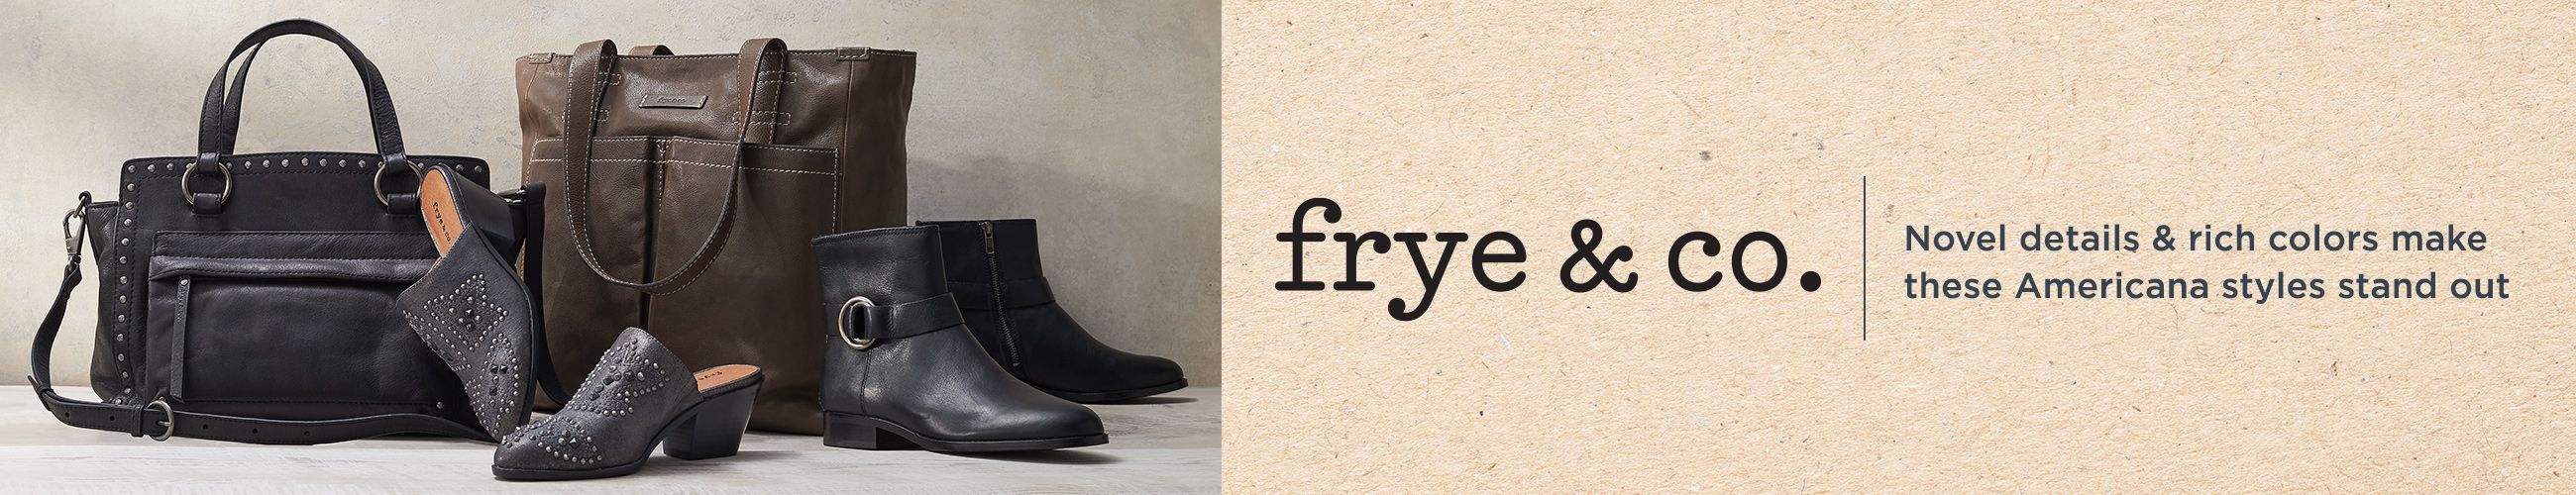 frye and co shoes